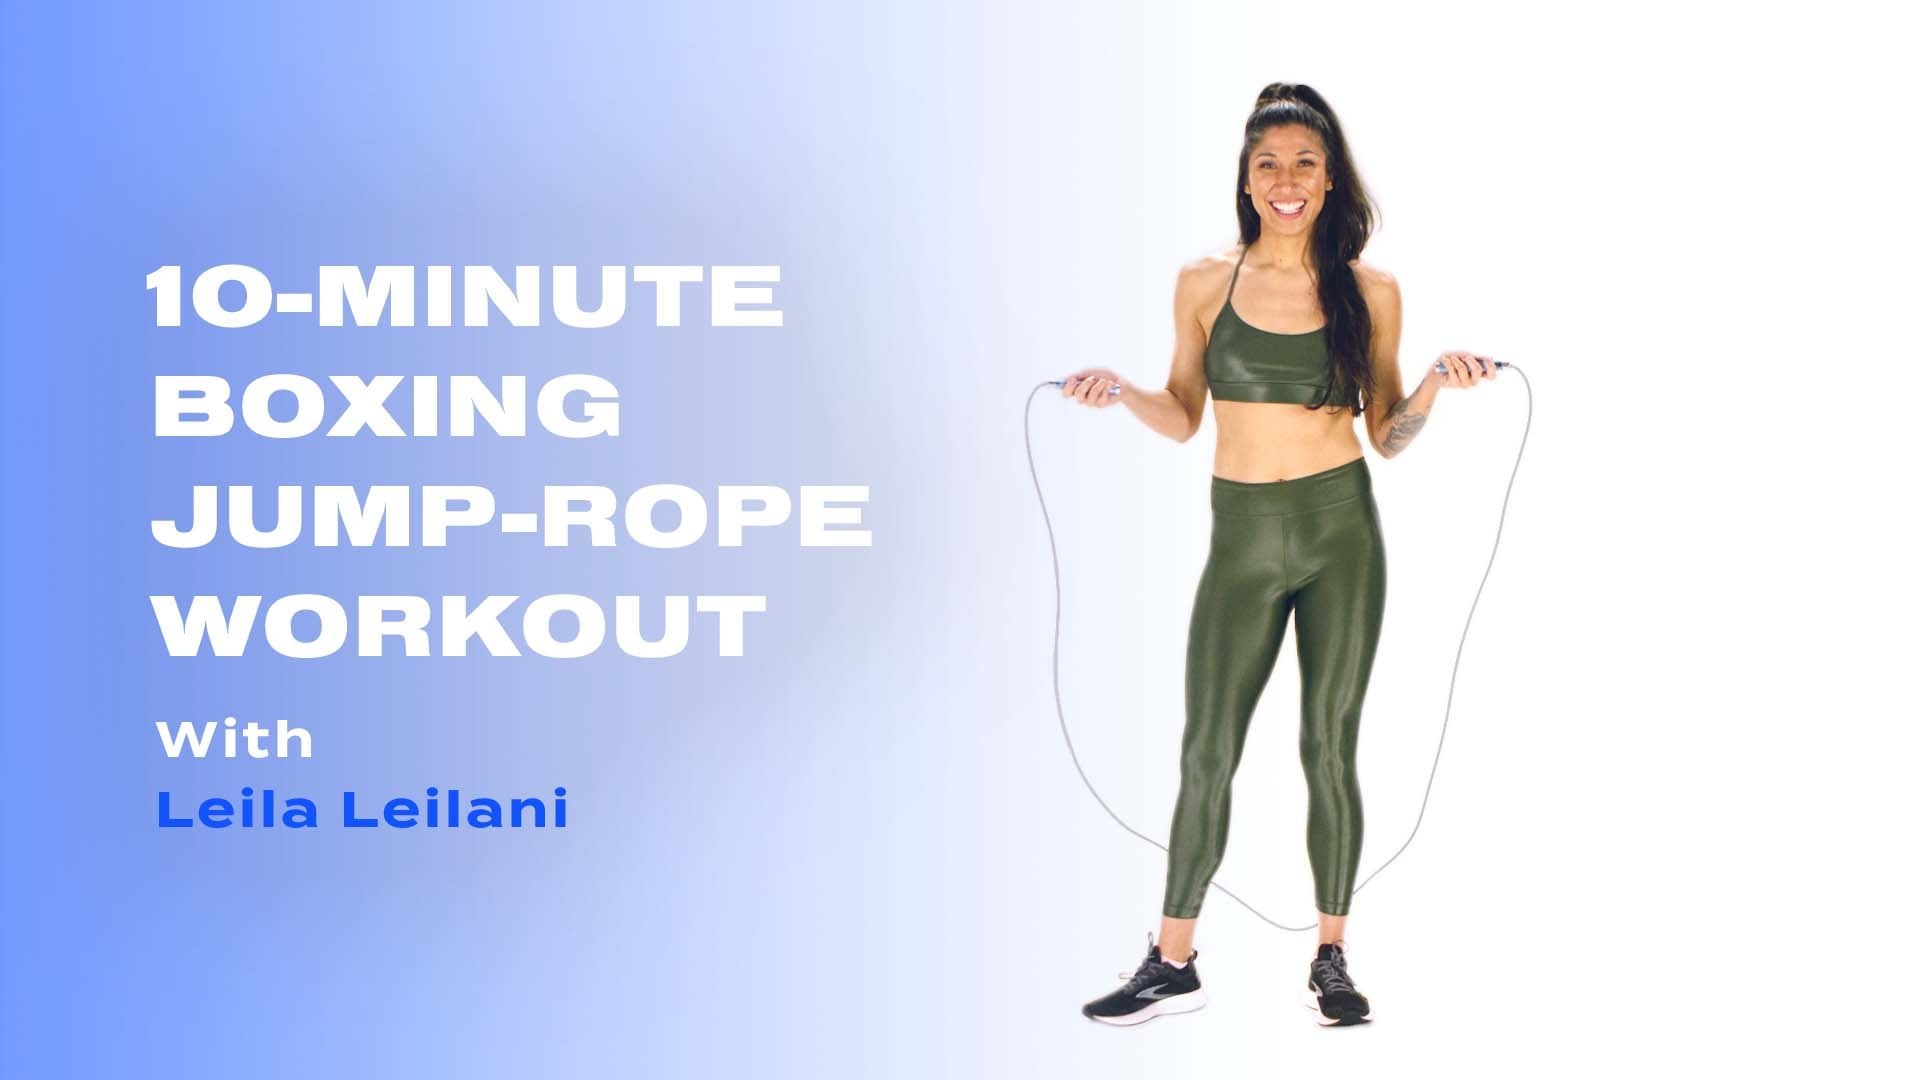 10-Minute Boxing Jump-Rope Workout With Leila Leilani - video Dailymotion